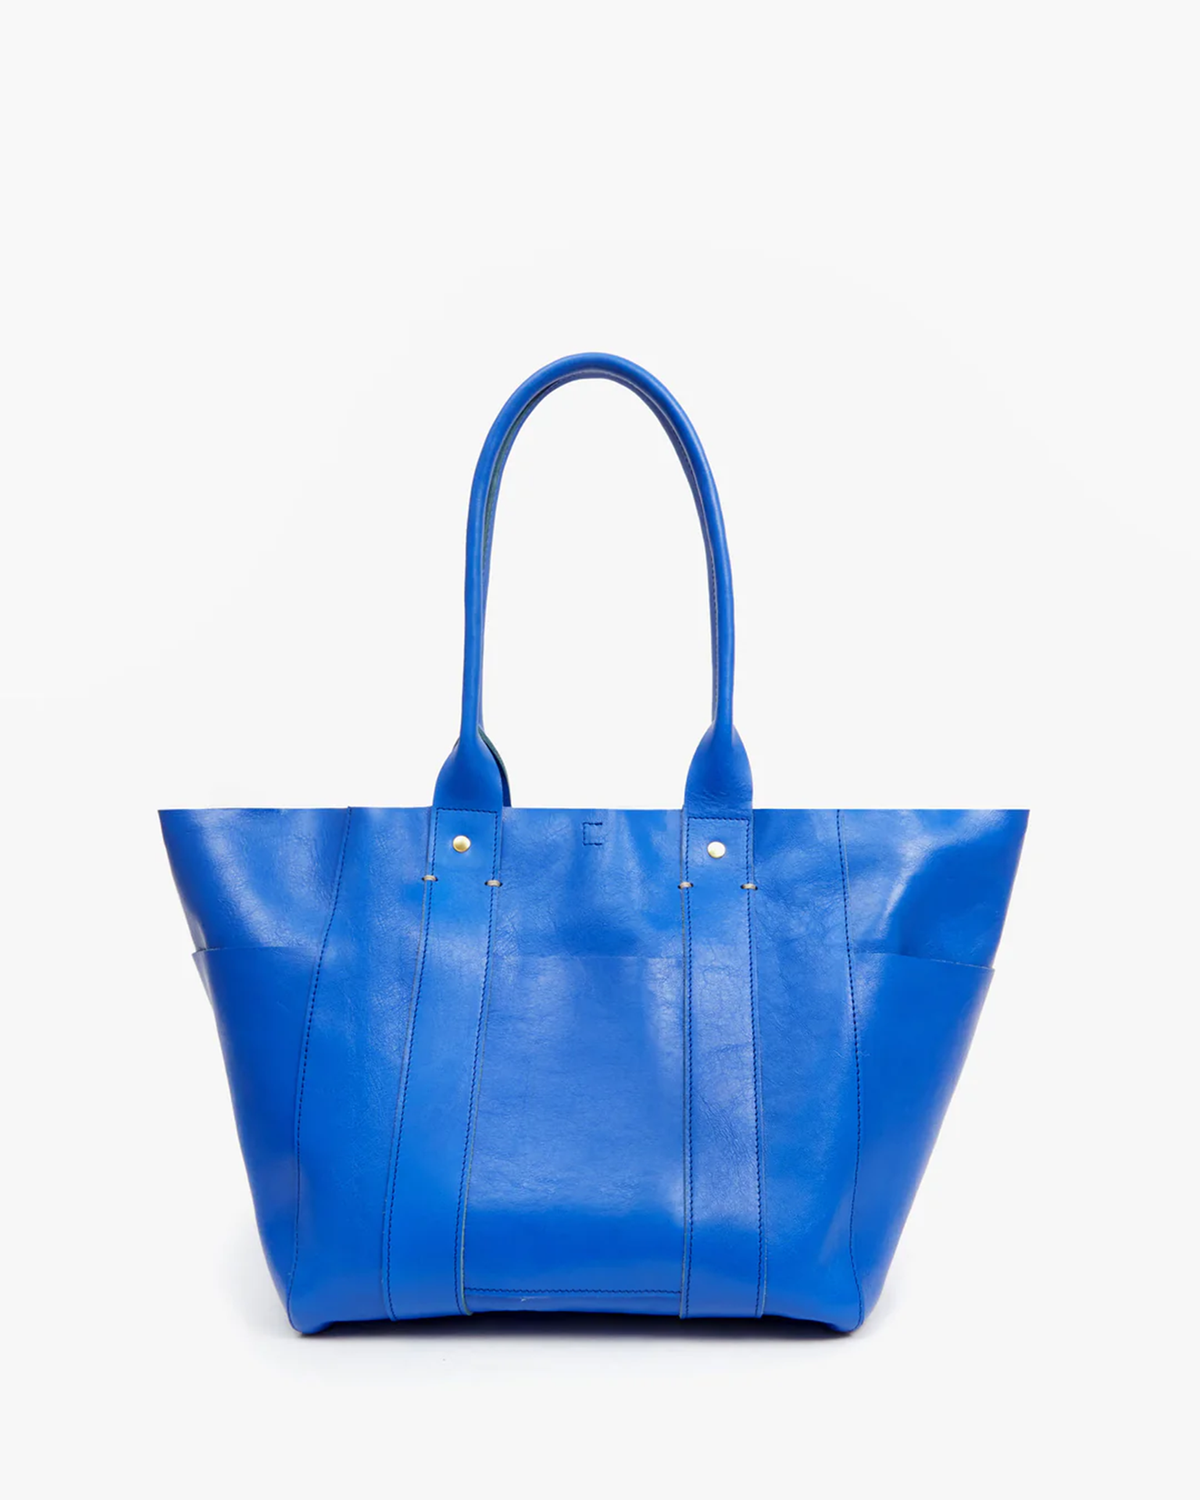 Visit Le Box Tote in Electric Blue Clare V. to find more. Shop for